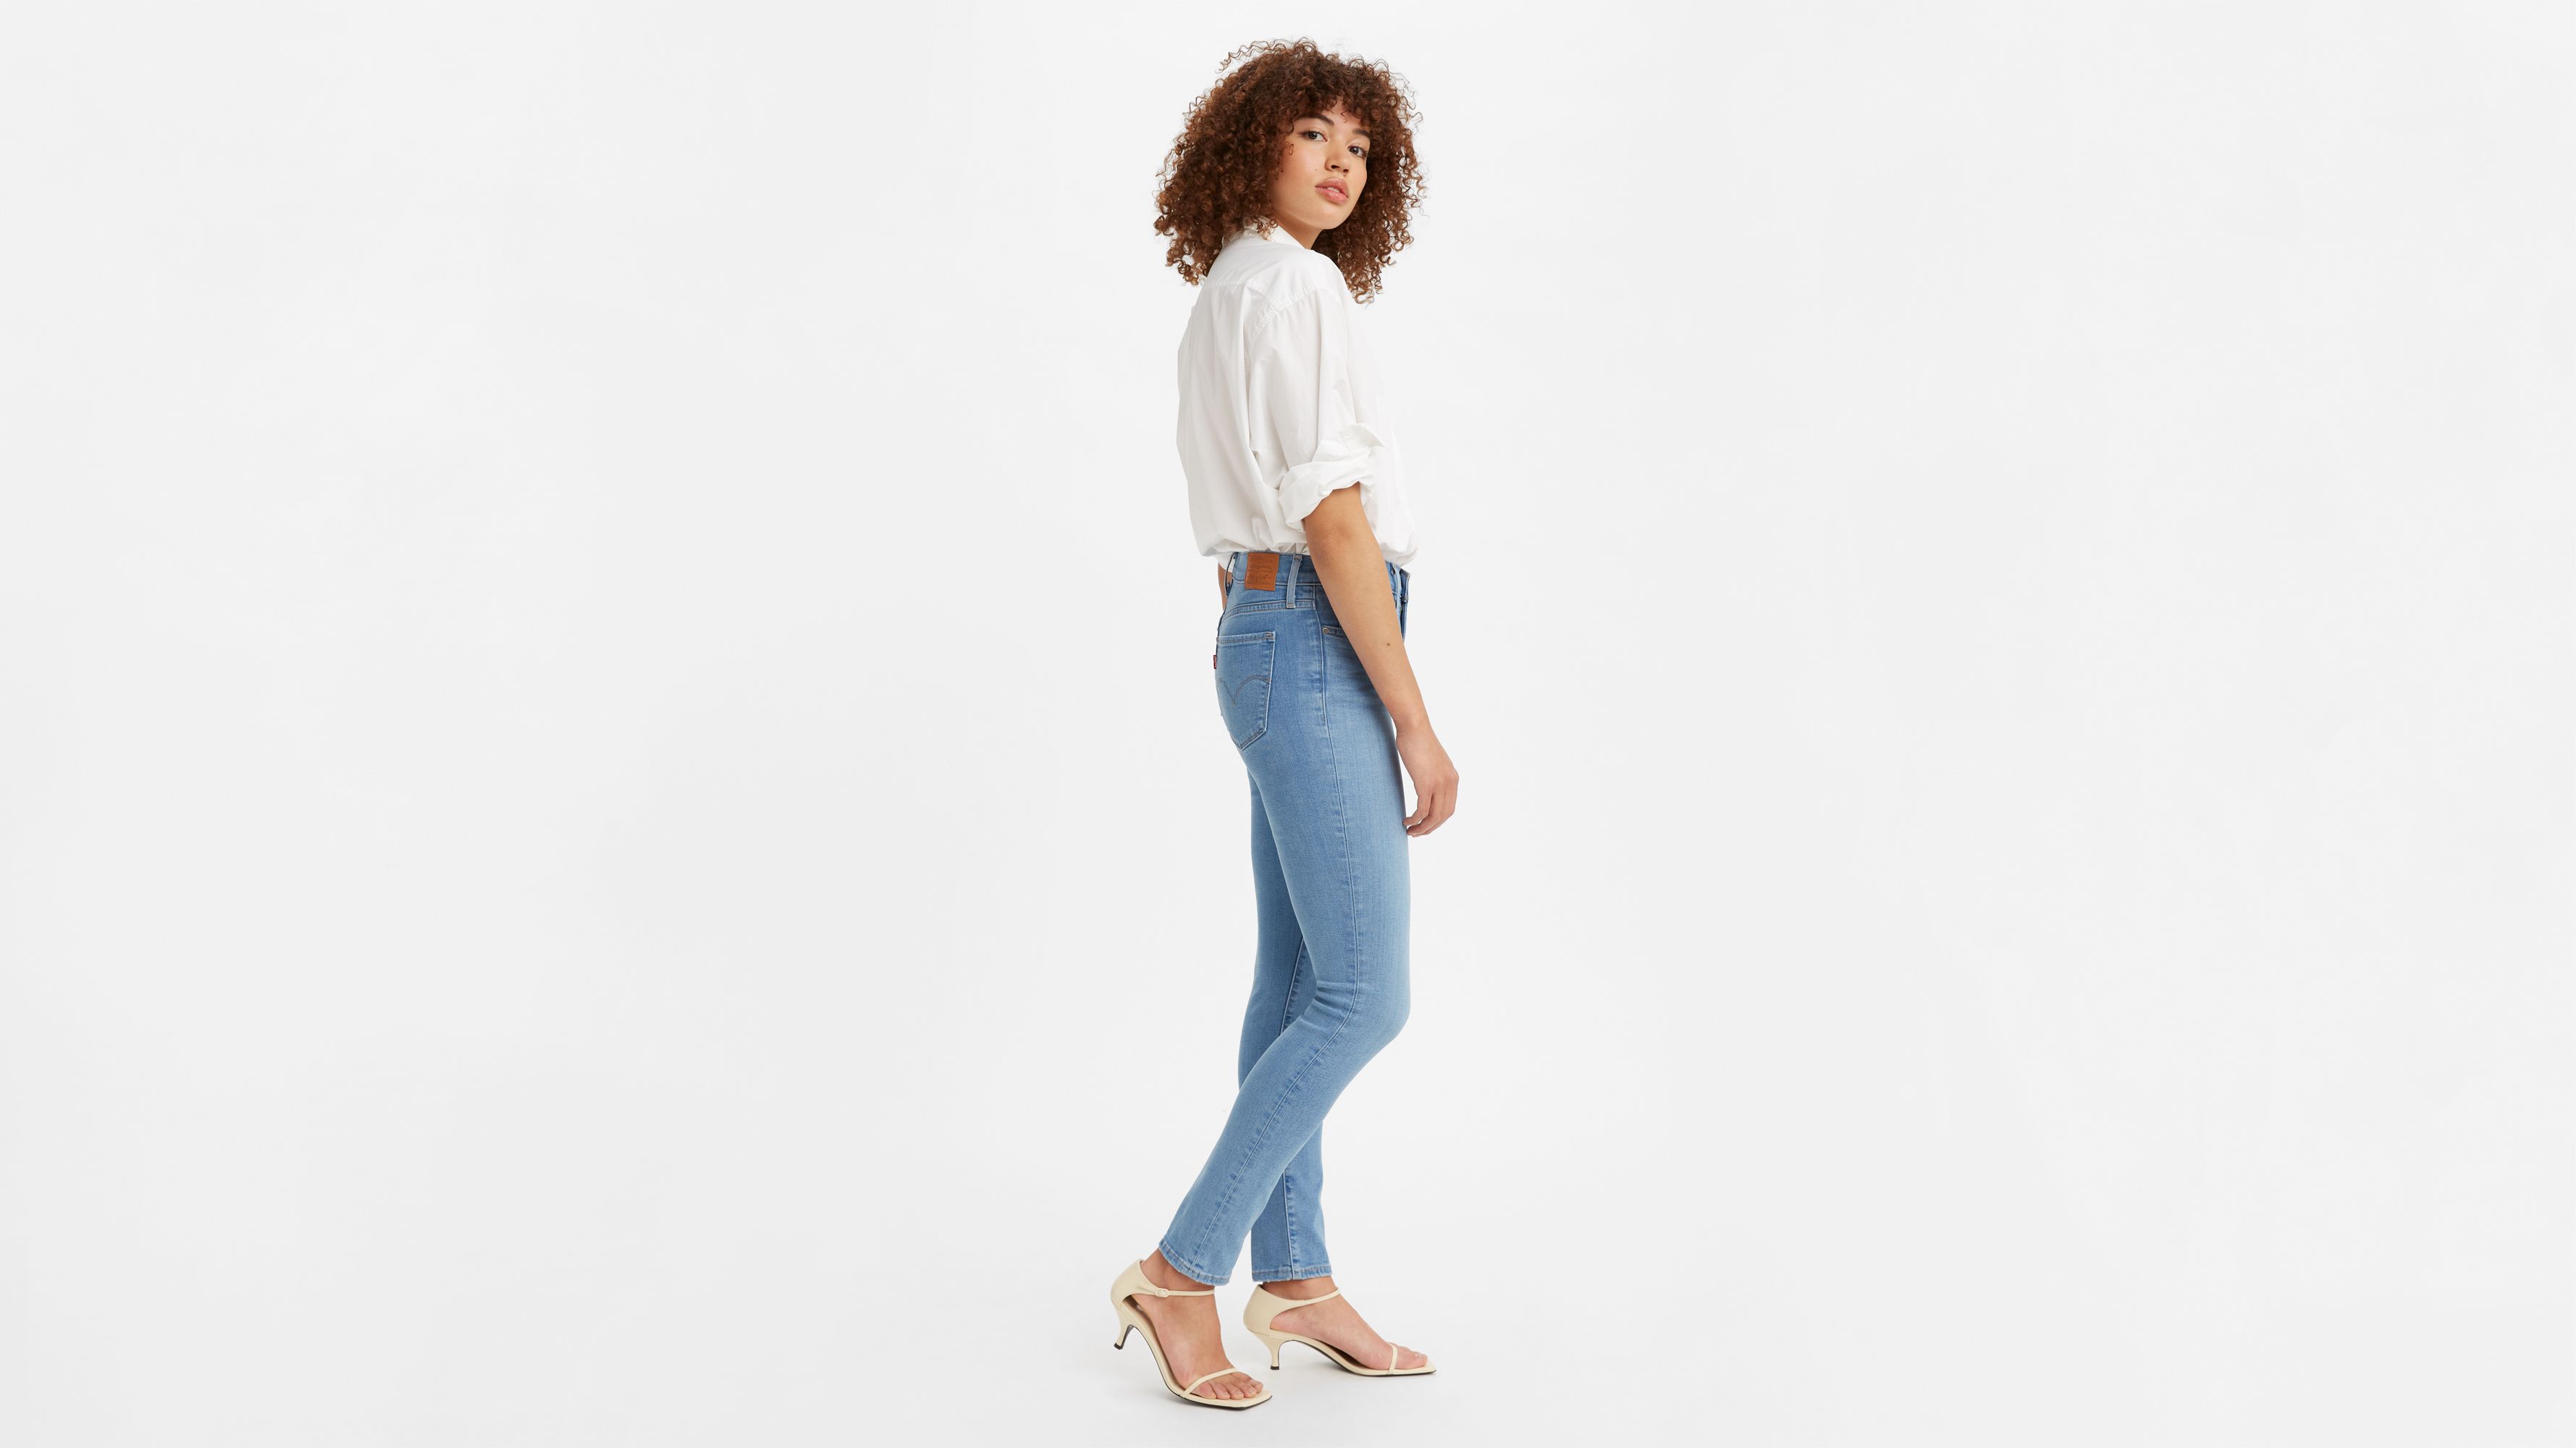 levi's 311 shaping skinny jeans